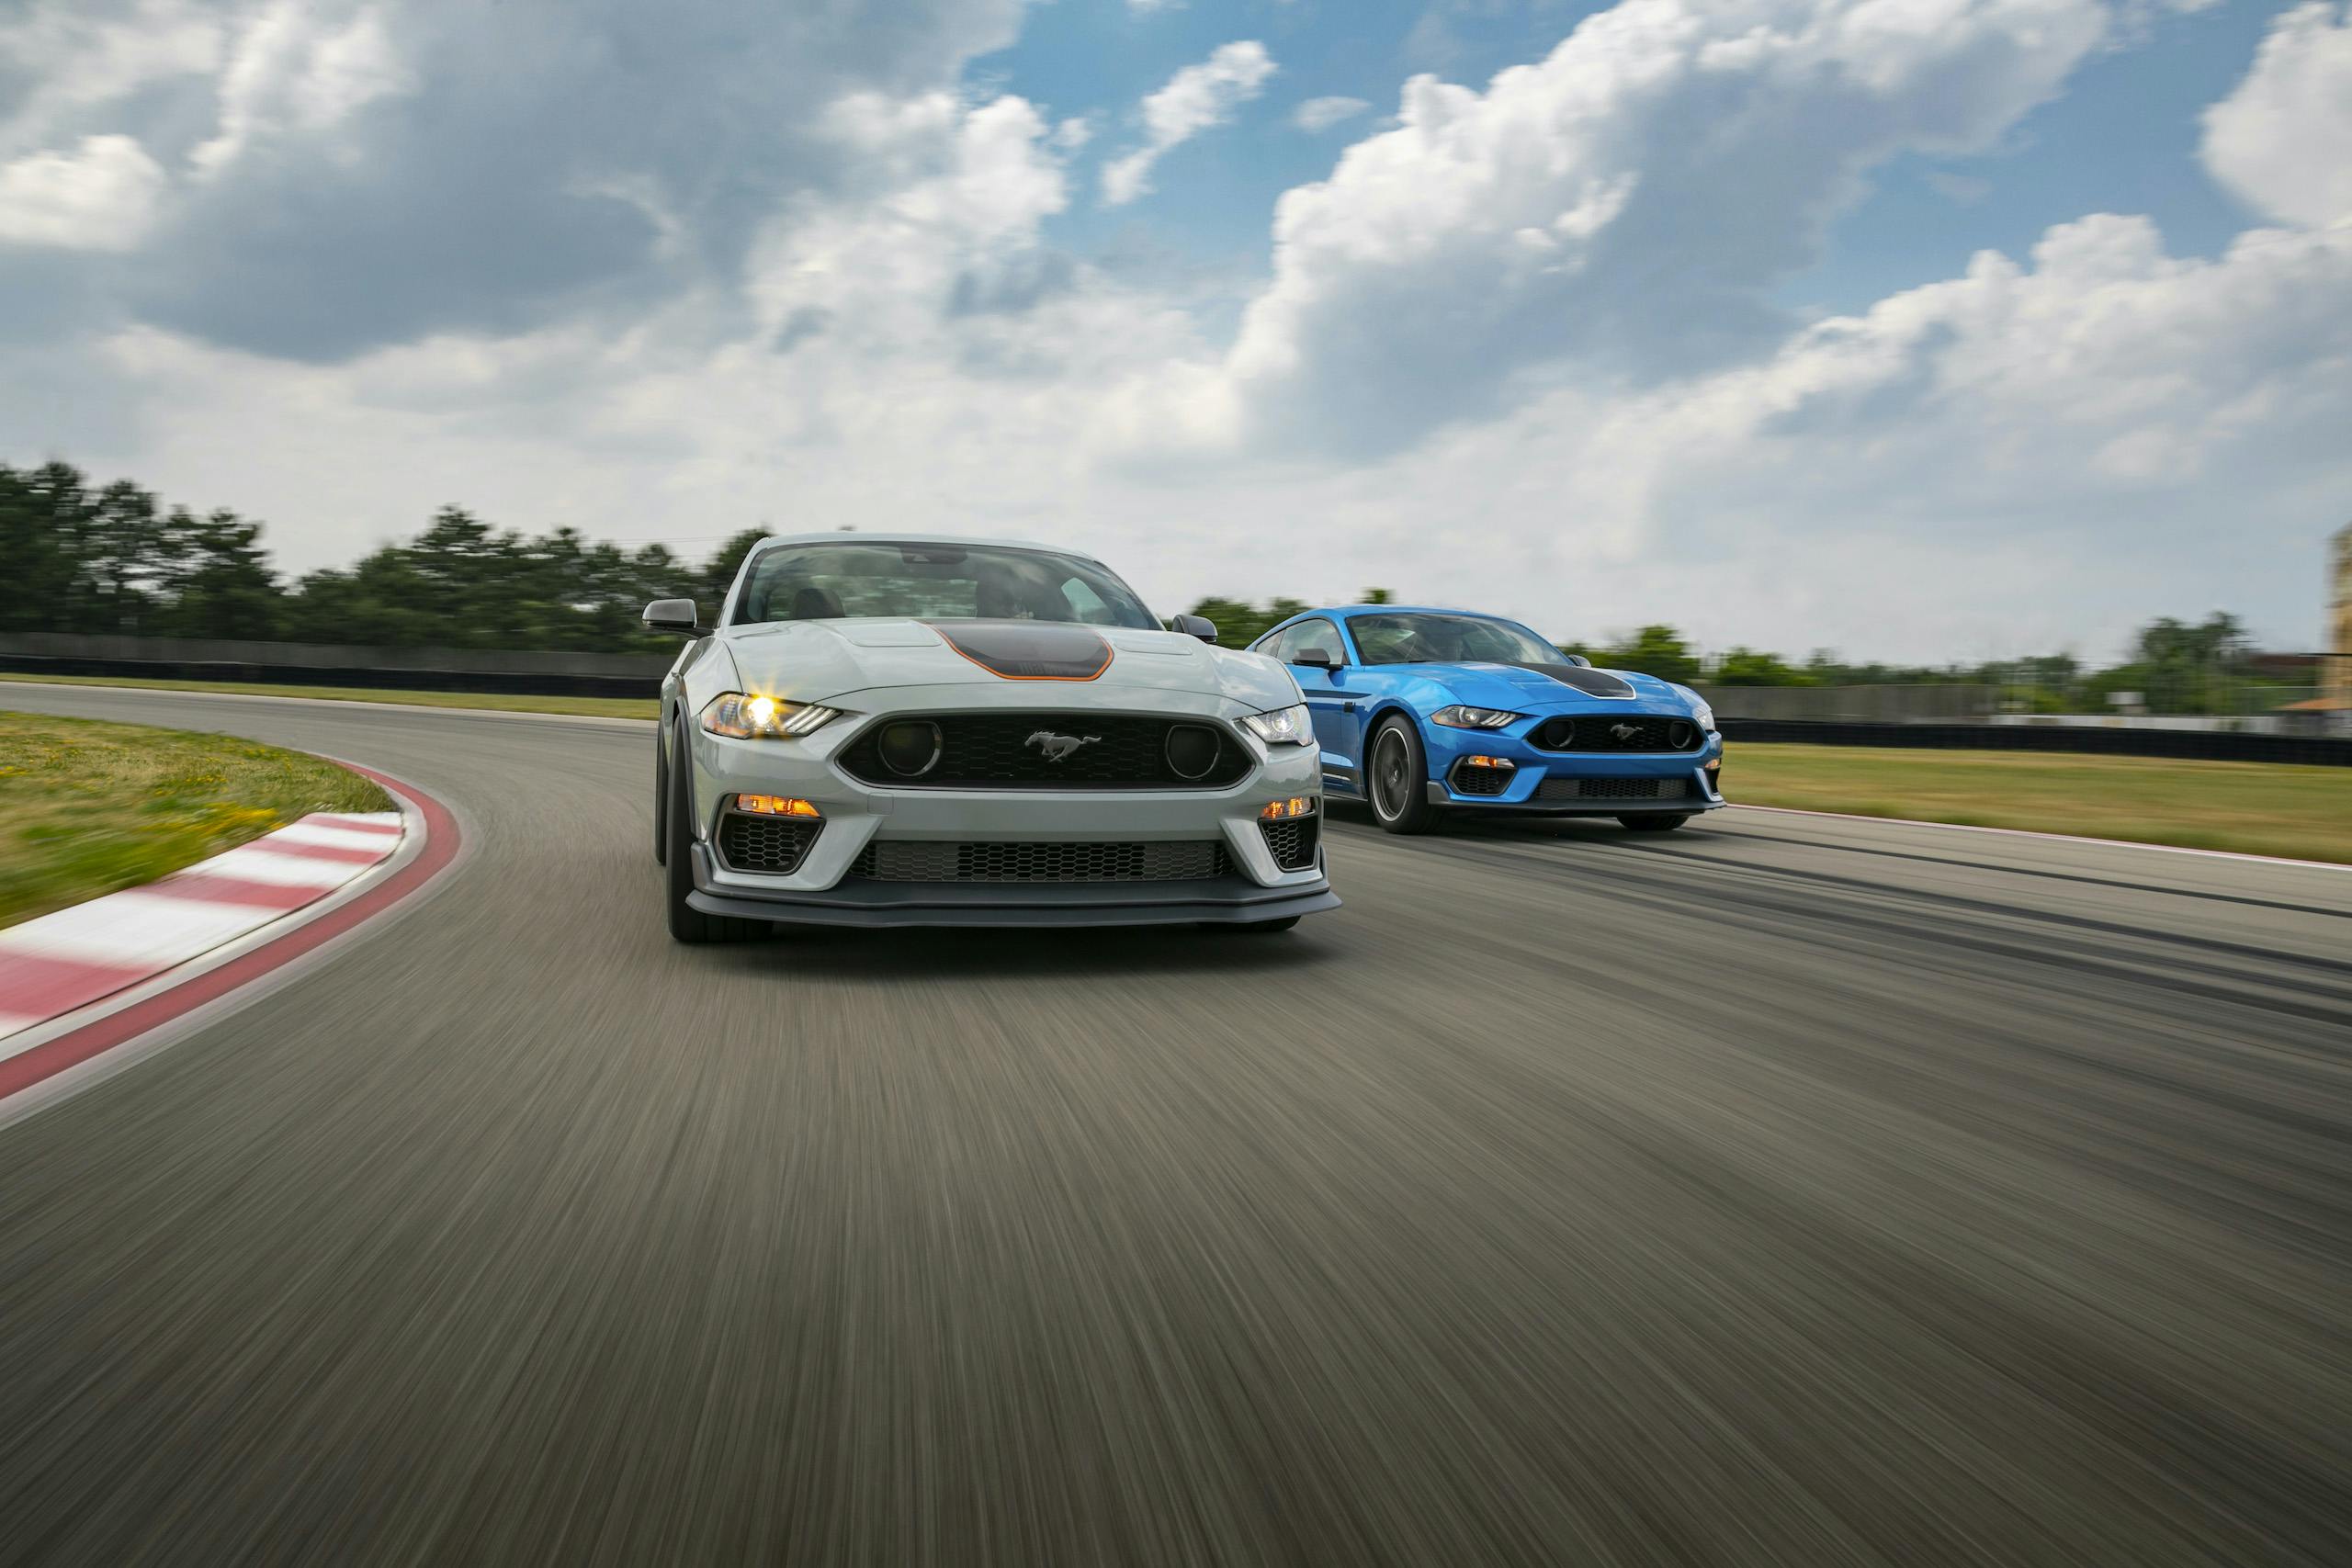 2021 Mustang Mach 1 white and blue on track action